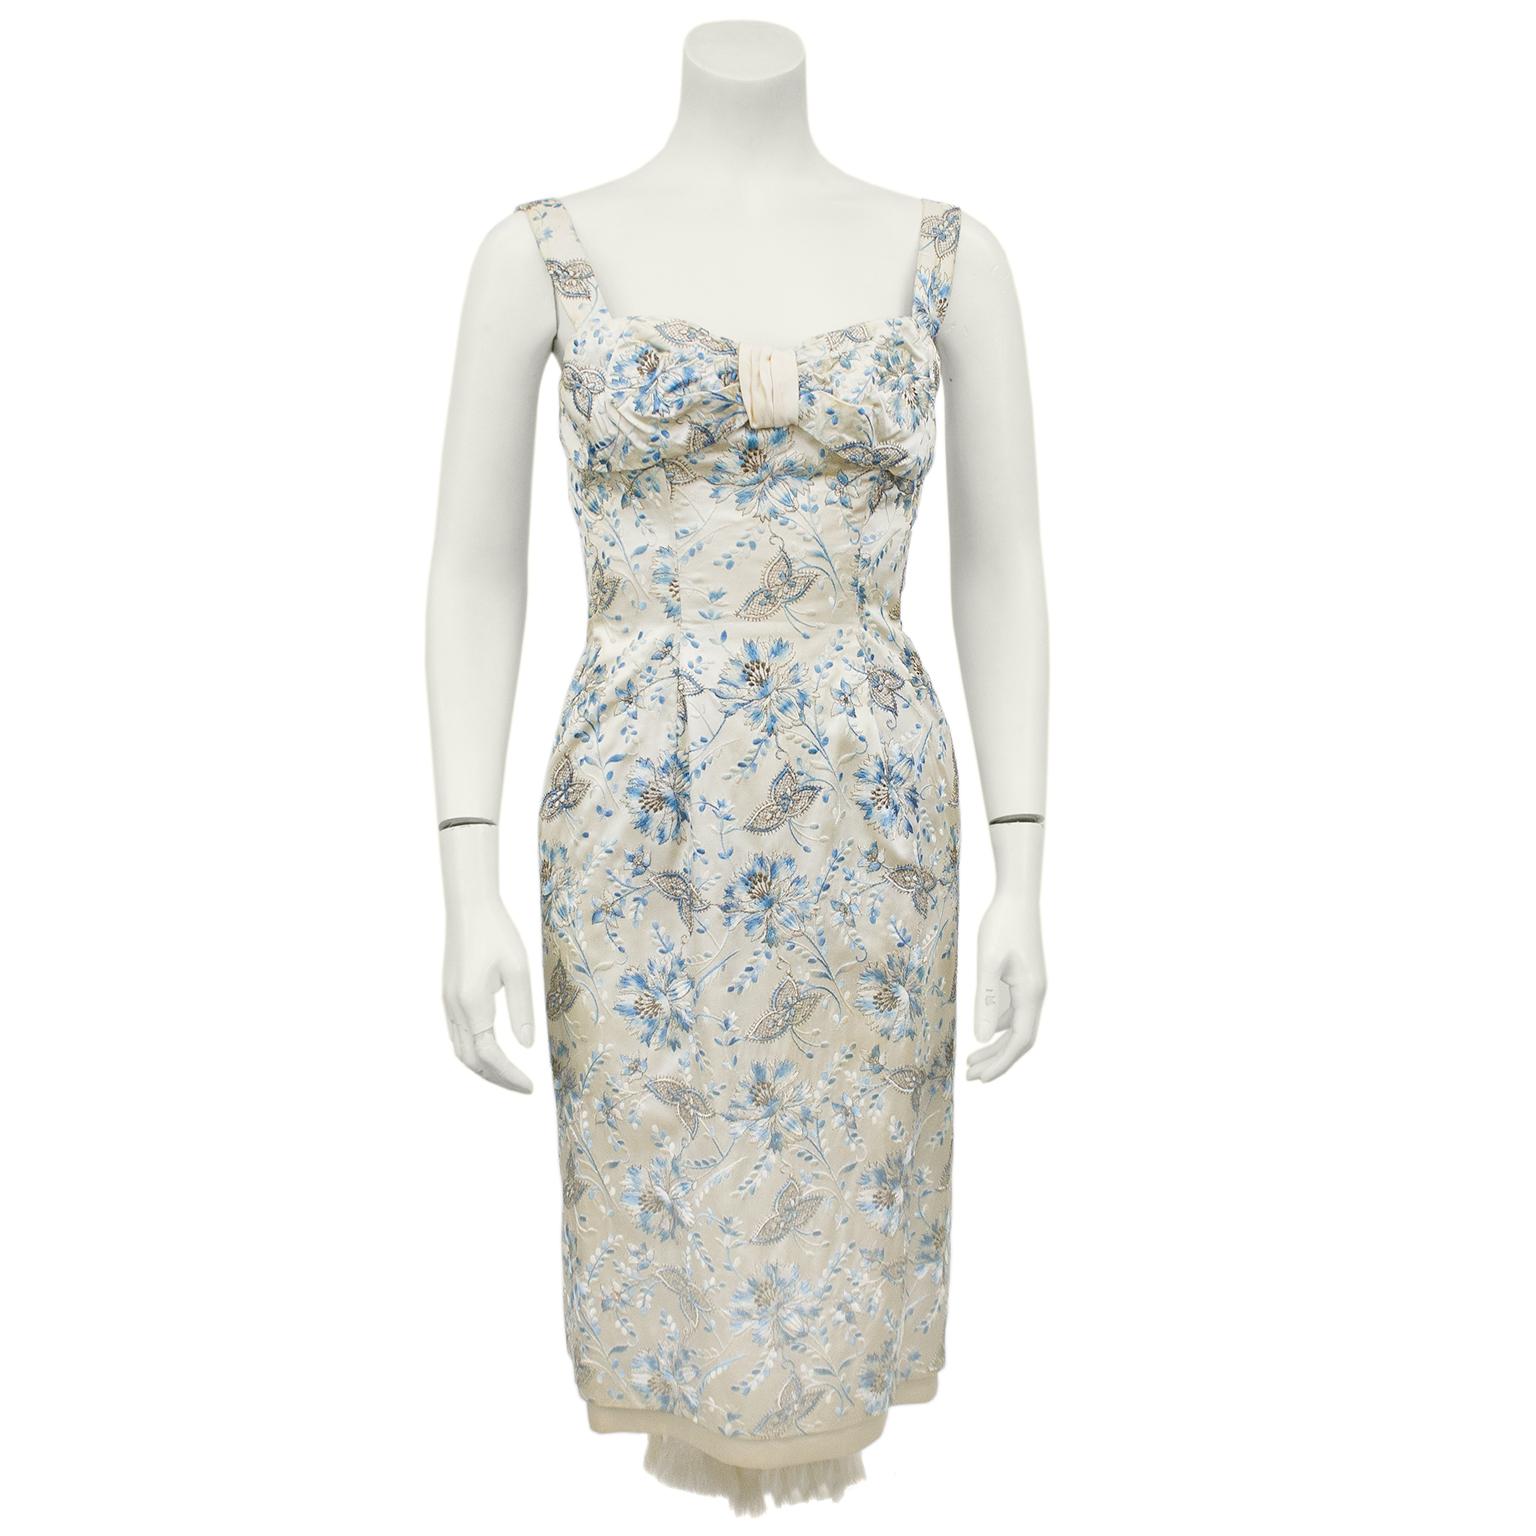 Early 1960's satin cocktail dress from Madrid based Spanish designer Varga Ichagaria. Beautiful blue floral all over floral embroidery, inspired by the DIor/Eisa evening look. Fitted bodice with a slight ruching detail at bust and pencil style